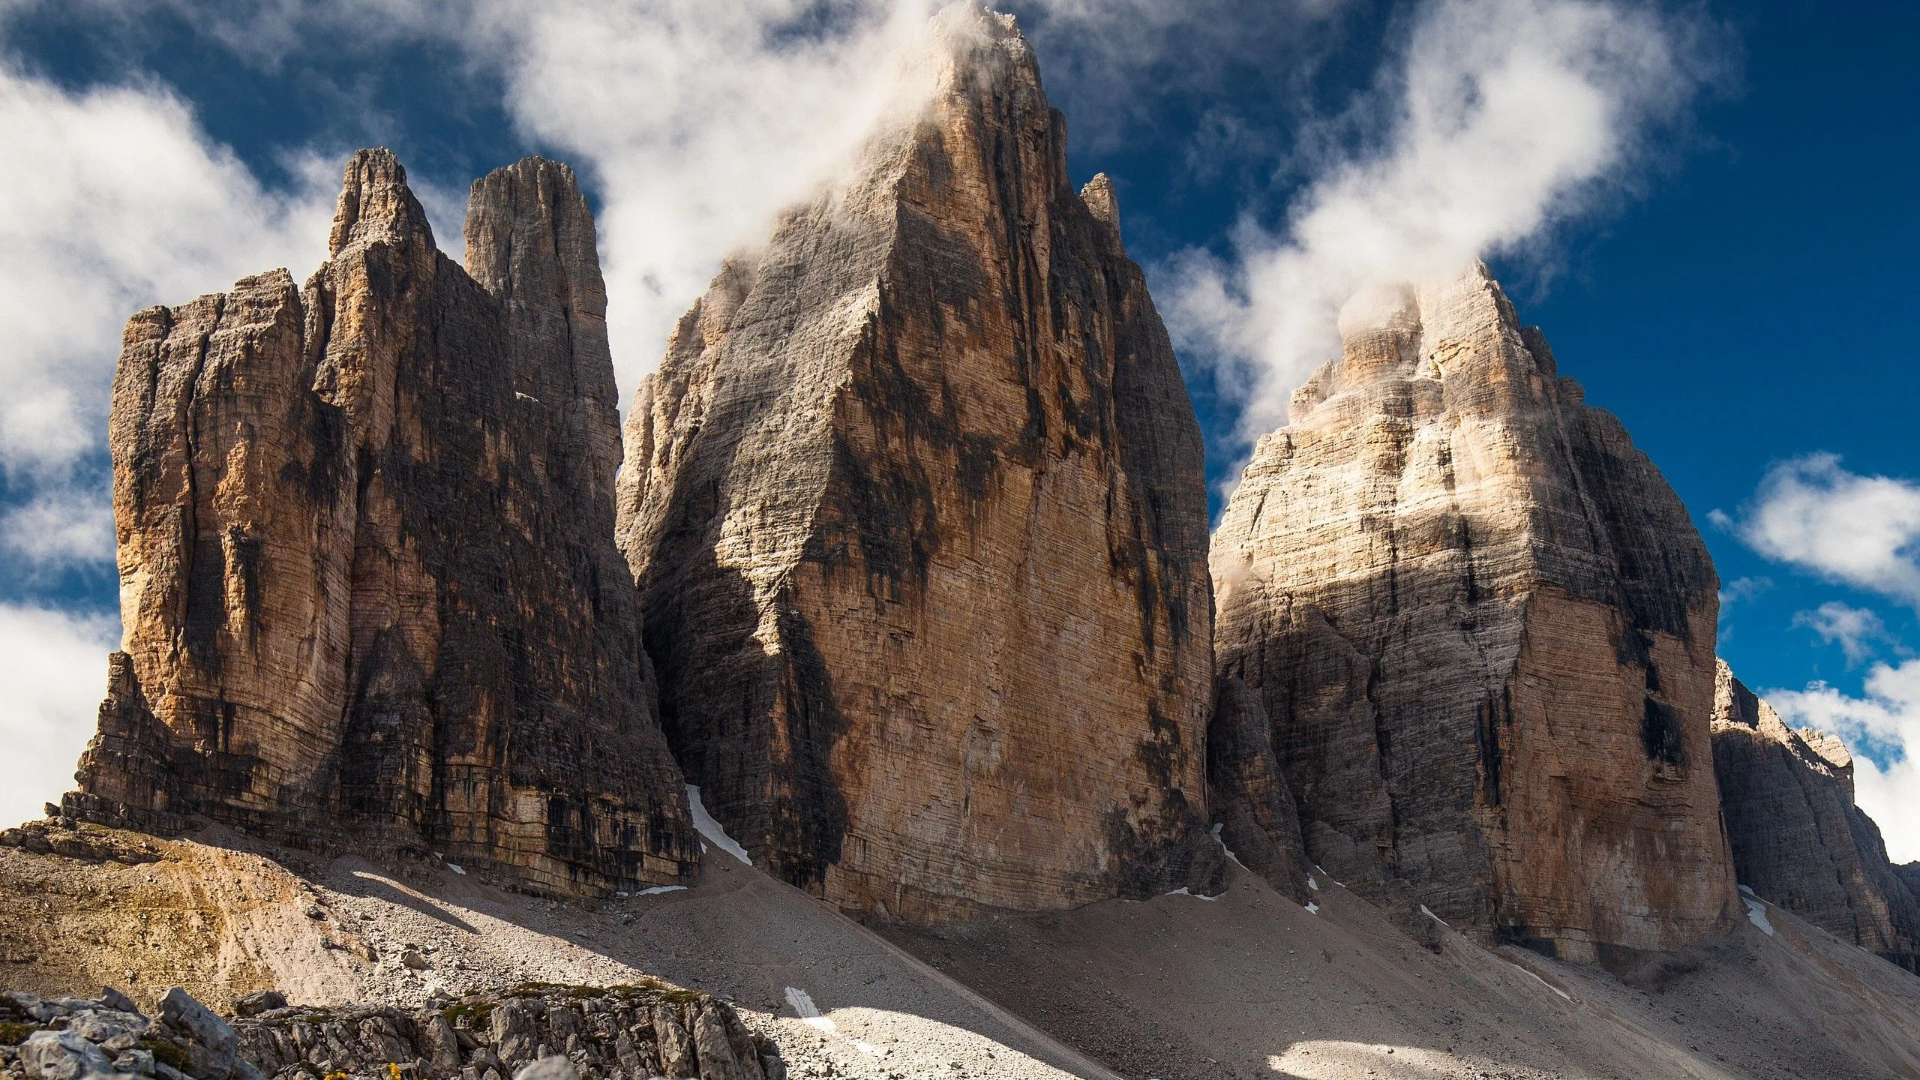 General 1920x1080 nature landscape clouds sky rocks rock formation mountains Dolomites Italy Three Peaks of Lavaredo